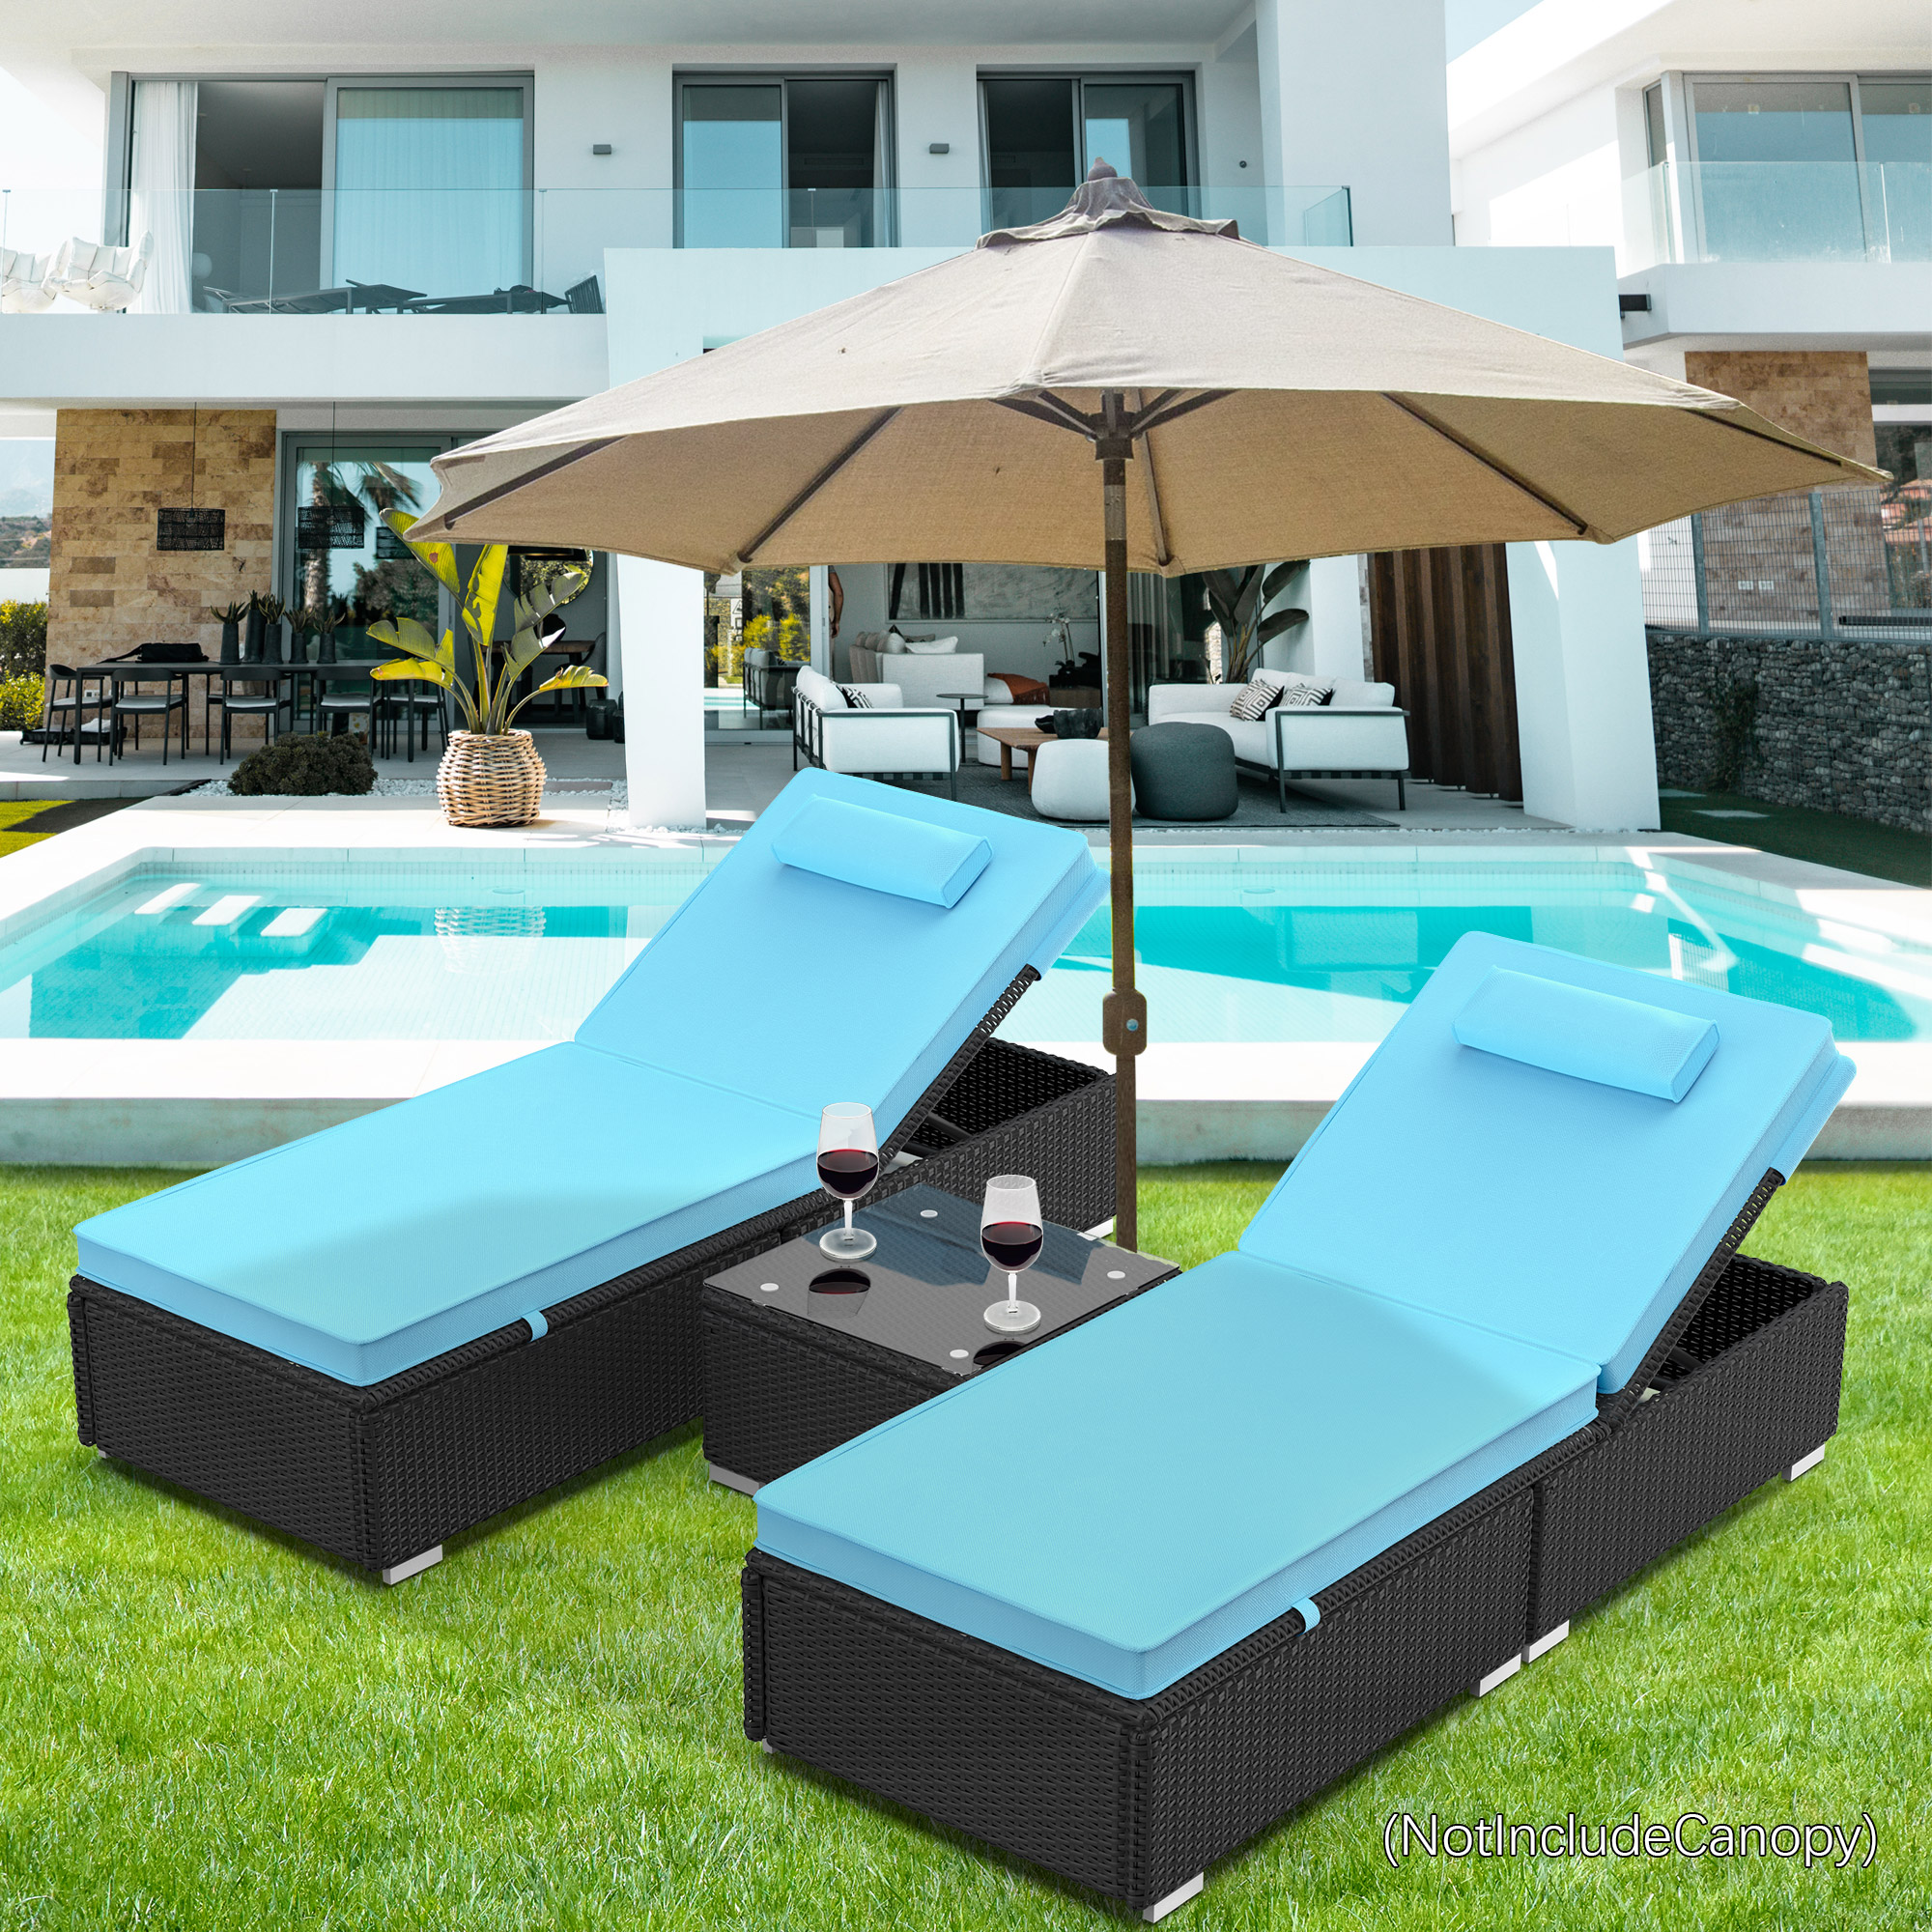 Reclining Outdoor Patio Lounge Furniture Set of 2, 3 Pieces All-Weather Poolside Rattan Wicker Pool Chaise Chairs Sets with 2 Pillows & Coffee Table, Brown PE Wicker and Blue, SS2114 - image 2 of 13